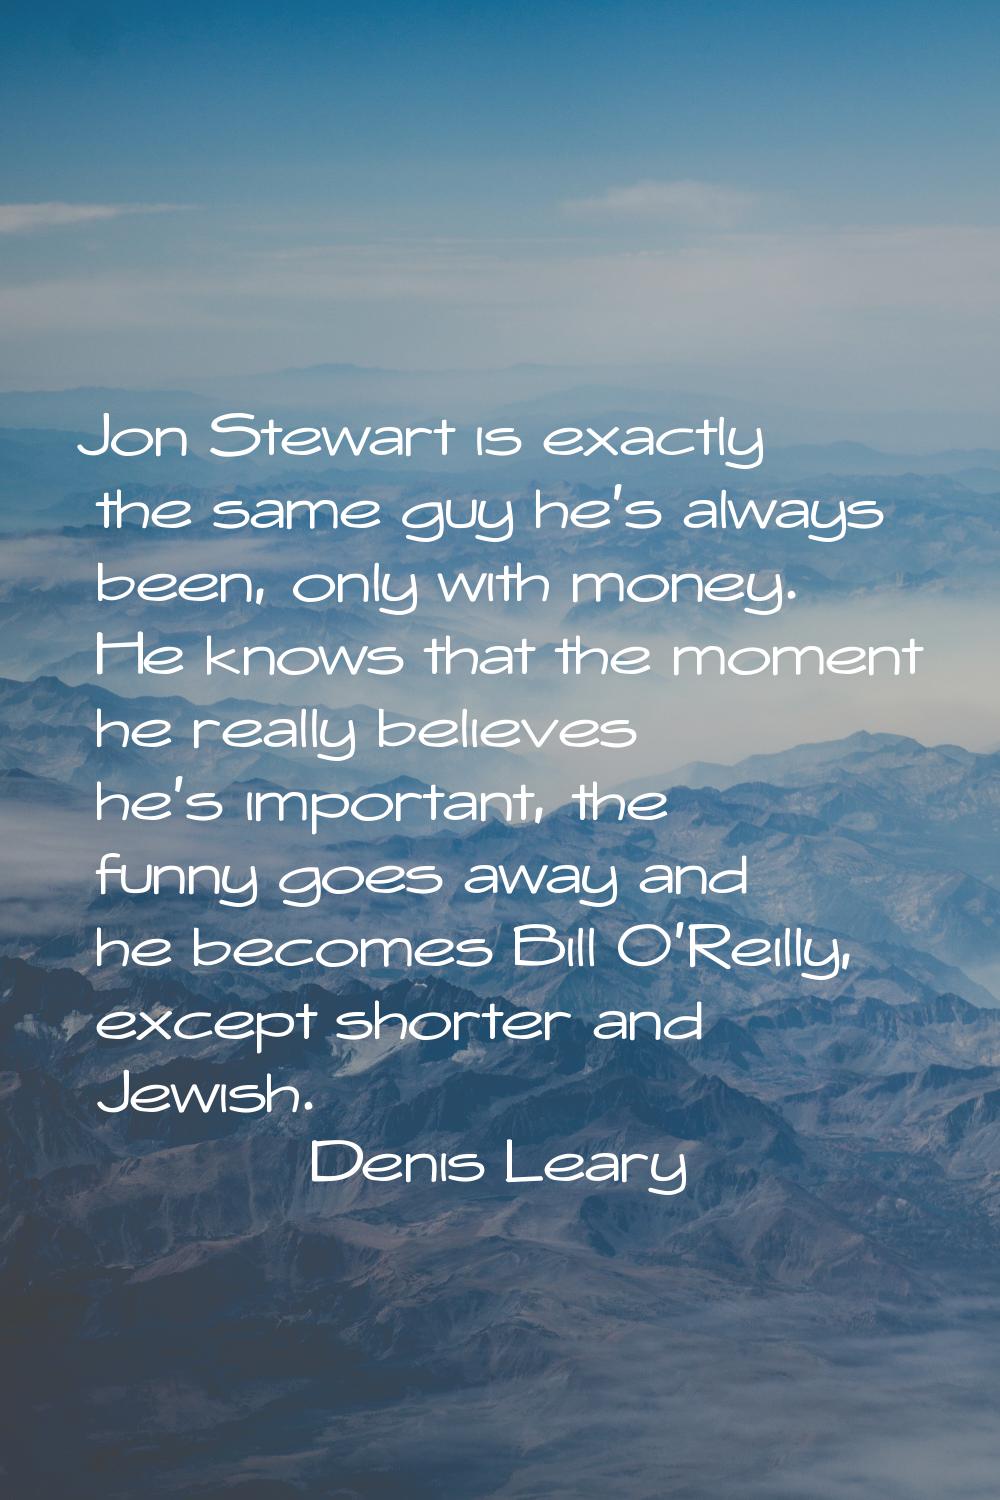 Jon Stewart is exactly the same guy he's always been, only with money. He knows that the moment he 